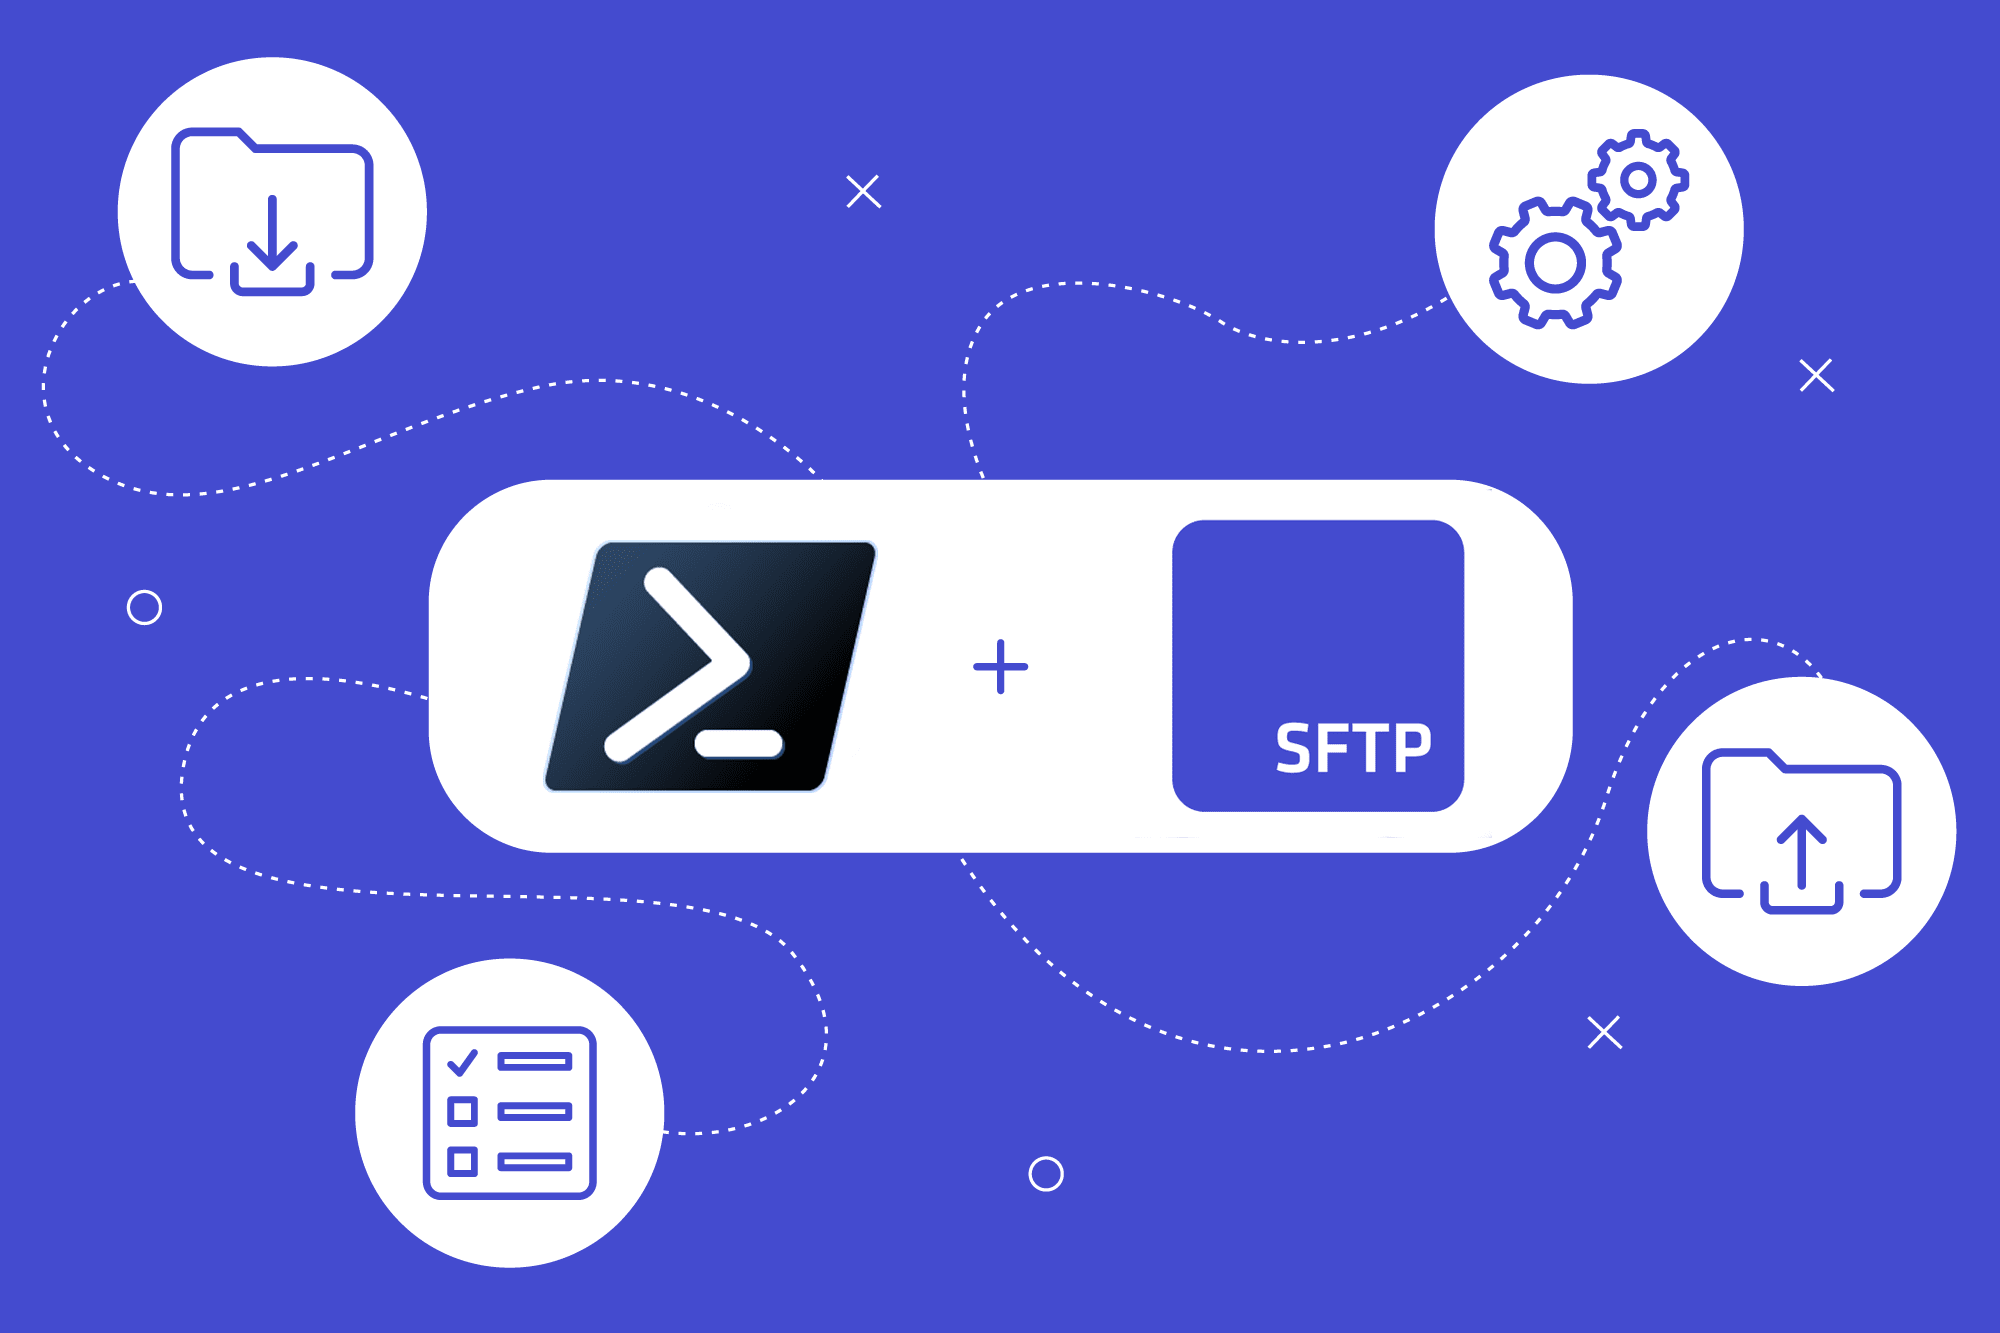 How to connect to SFTP in PowerShell with SFTP To Go